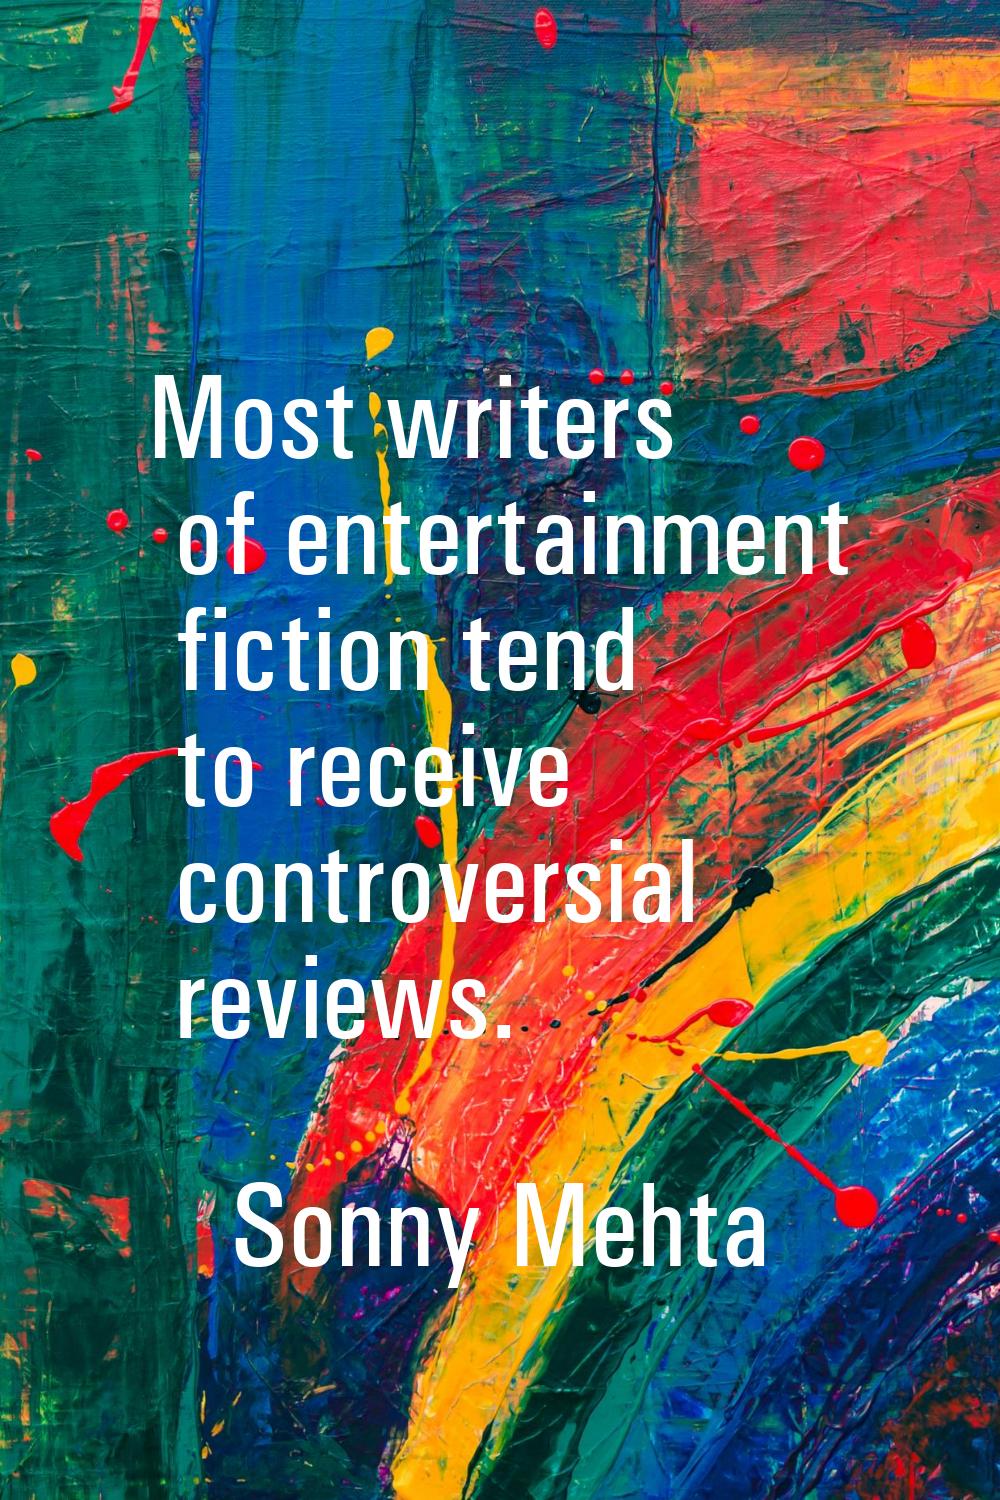 Most writers of entertainment fiction tend to receive controversial reviews.